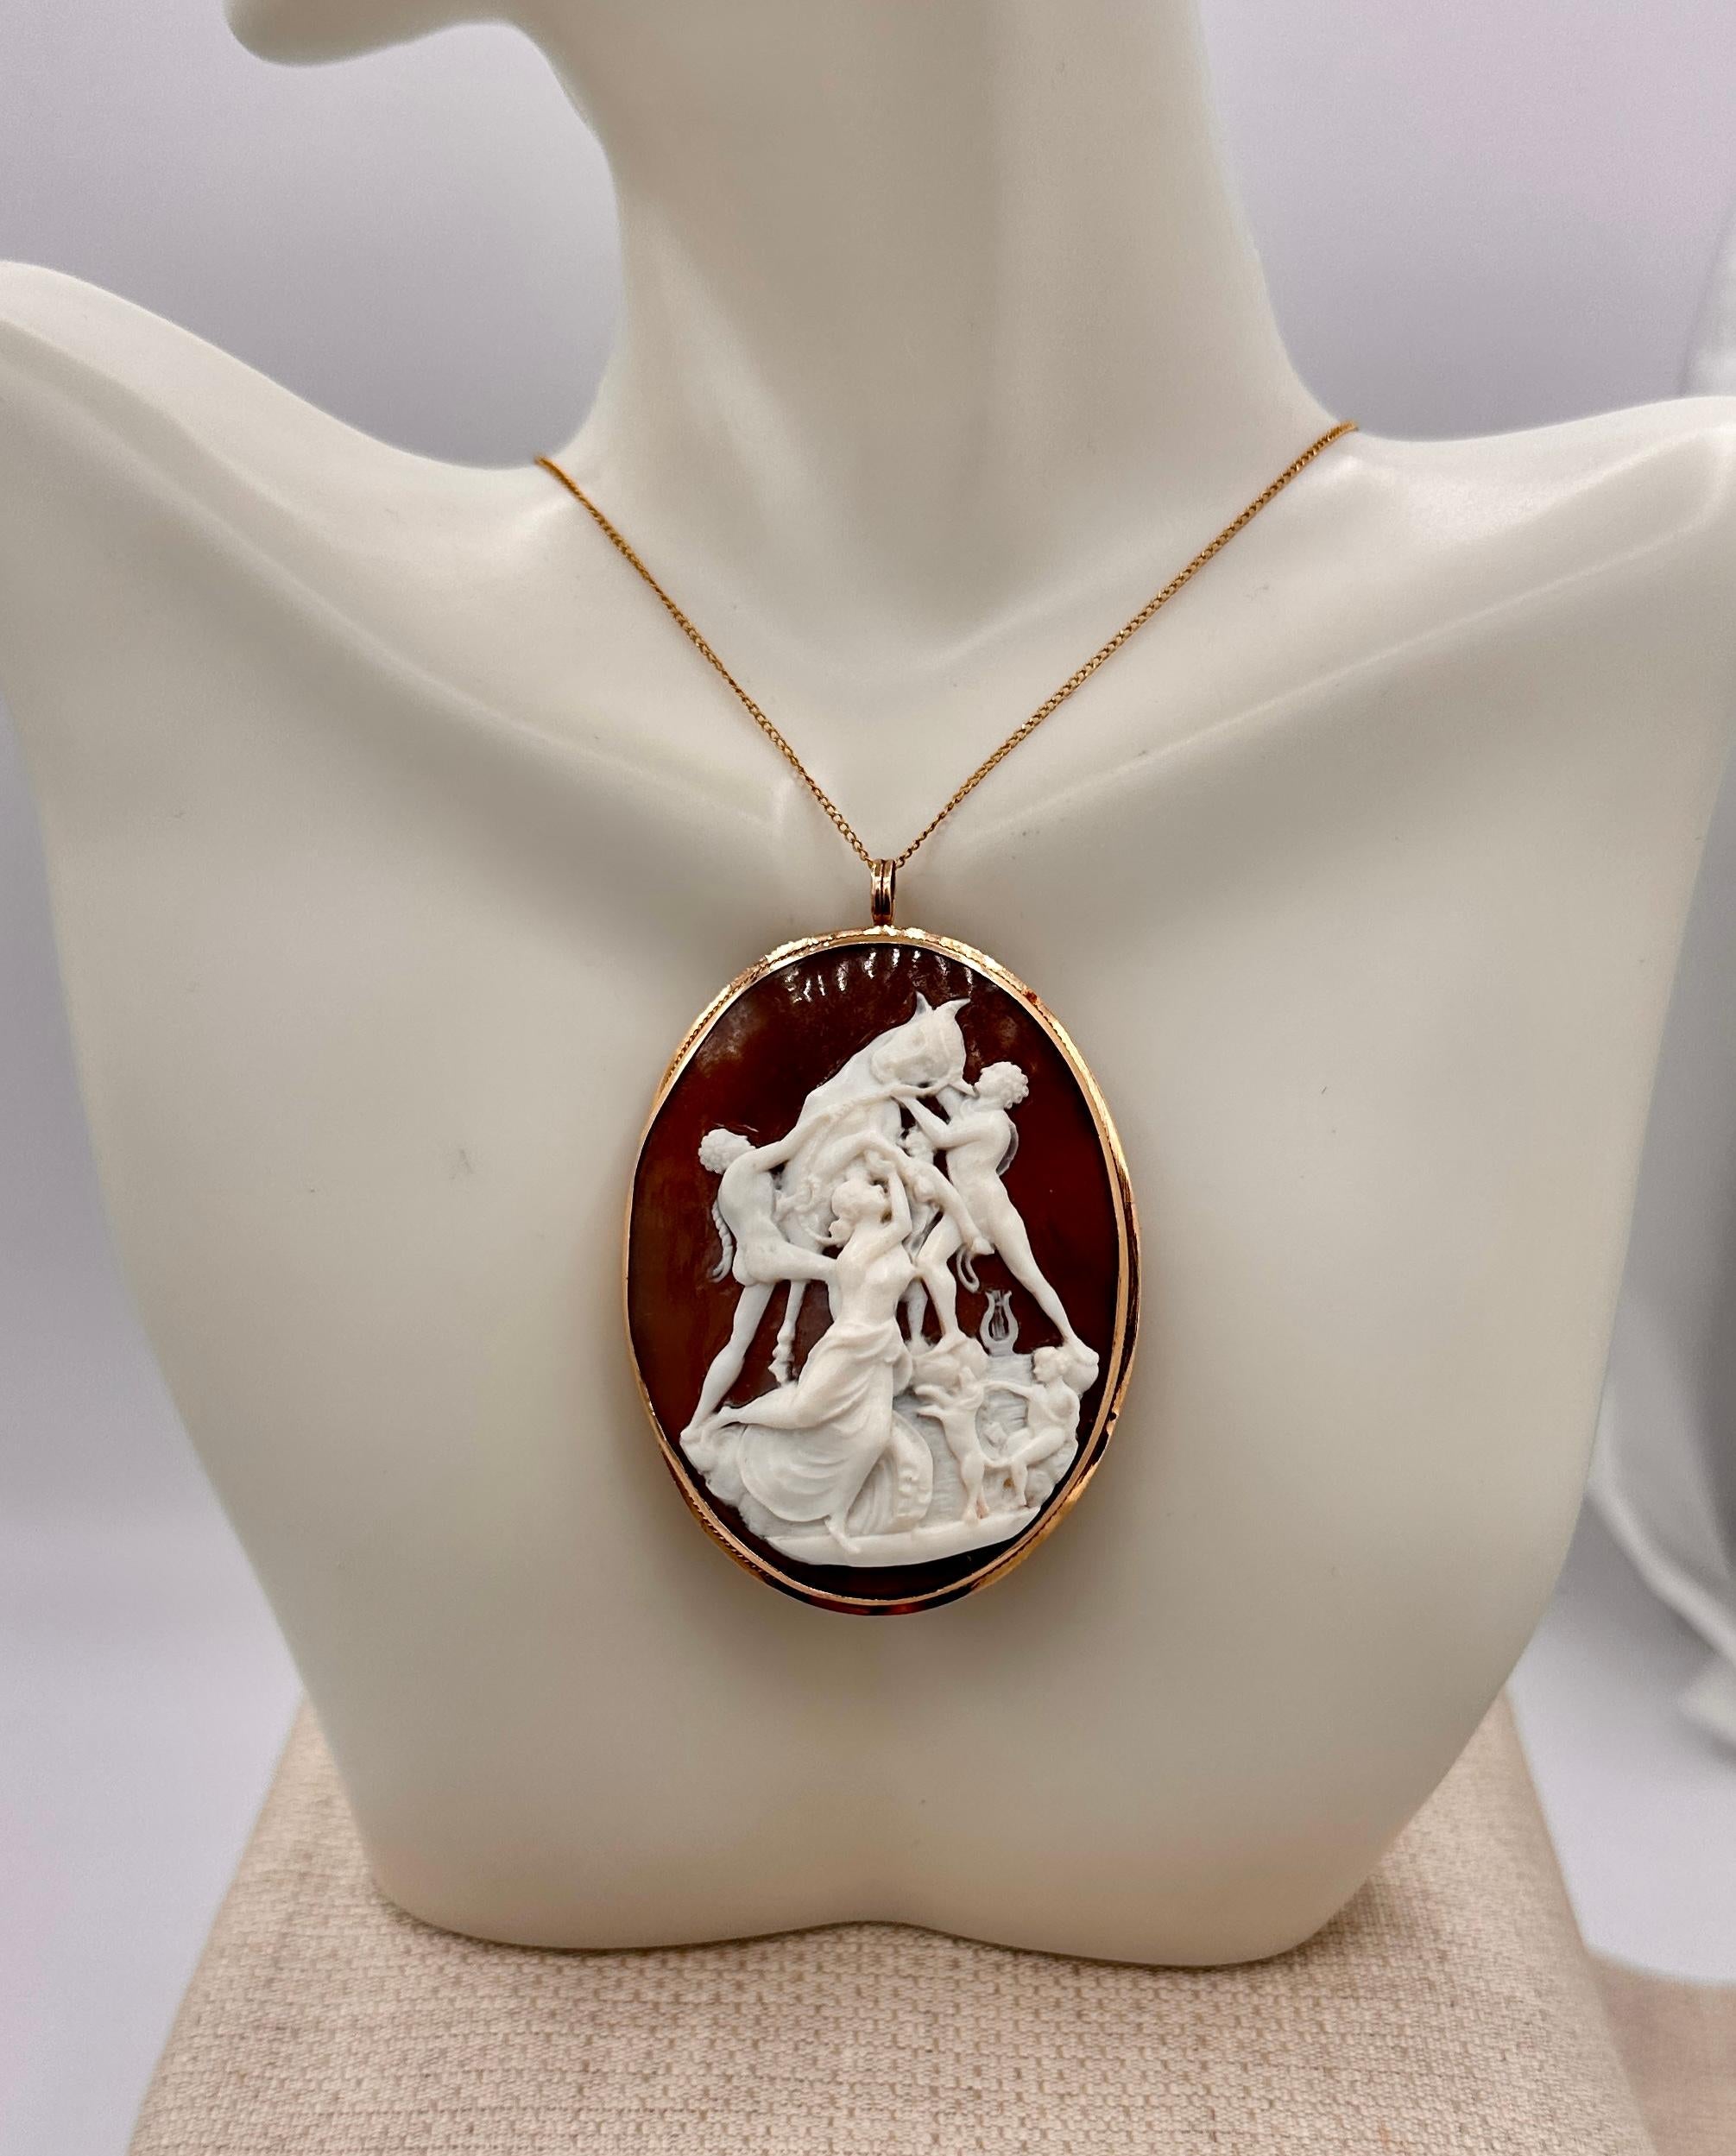 This is an absolutely stunning and very rare large antique Shell Cameo Pendant Brooch with a hand carved image of the bull, Taurus, or the Goddess Europa being abducted by Zeus in the form of a bull with nudes and an attendant dog!  The cameo is set